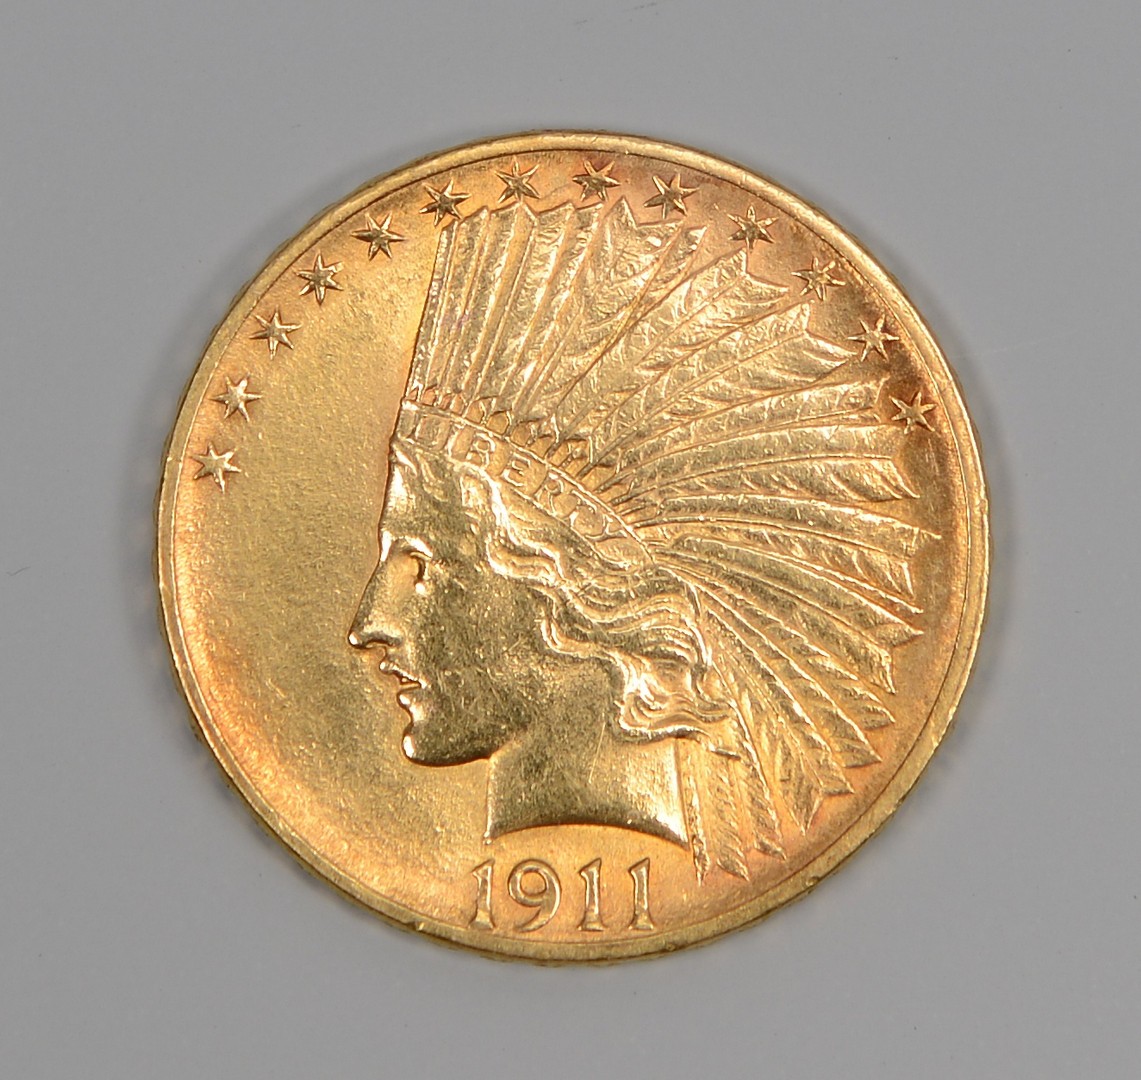 Lot 860: 1911 US $10 Indian Head Gold Coin